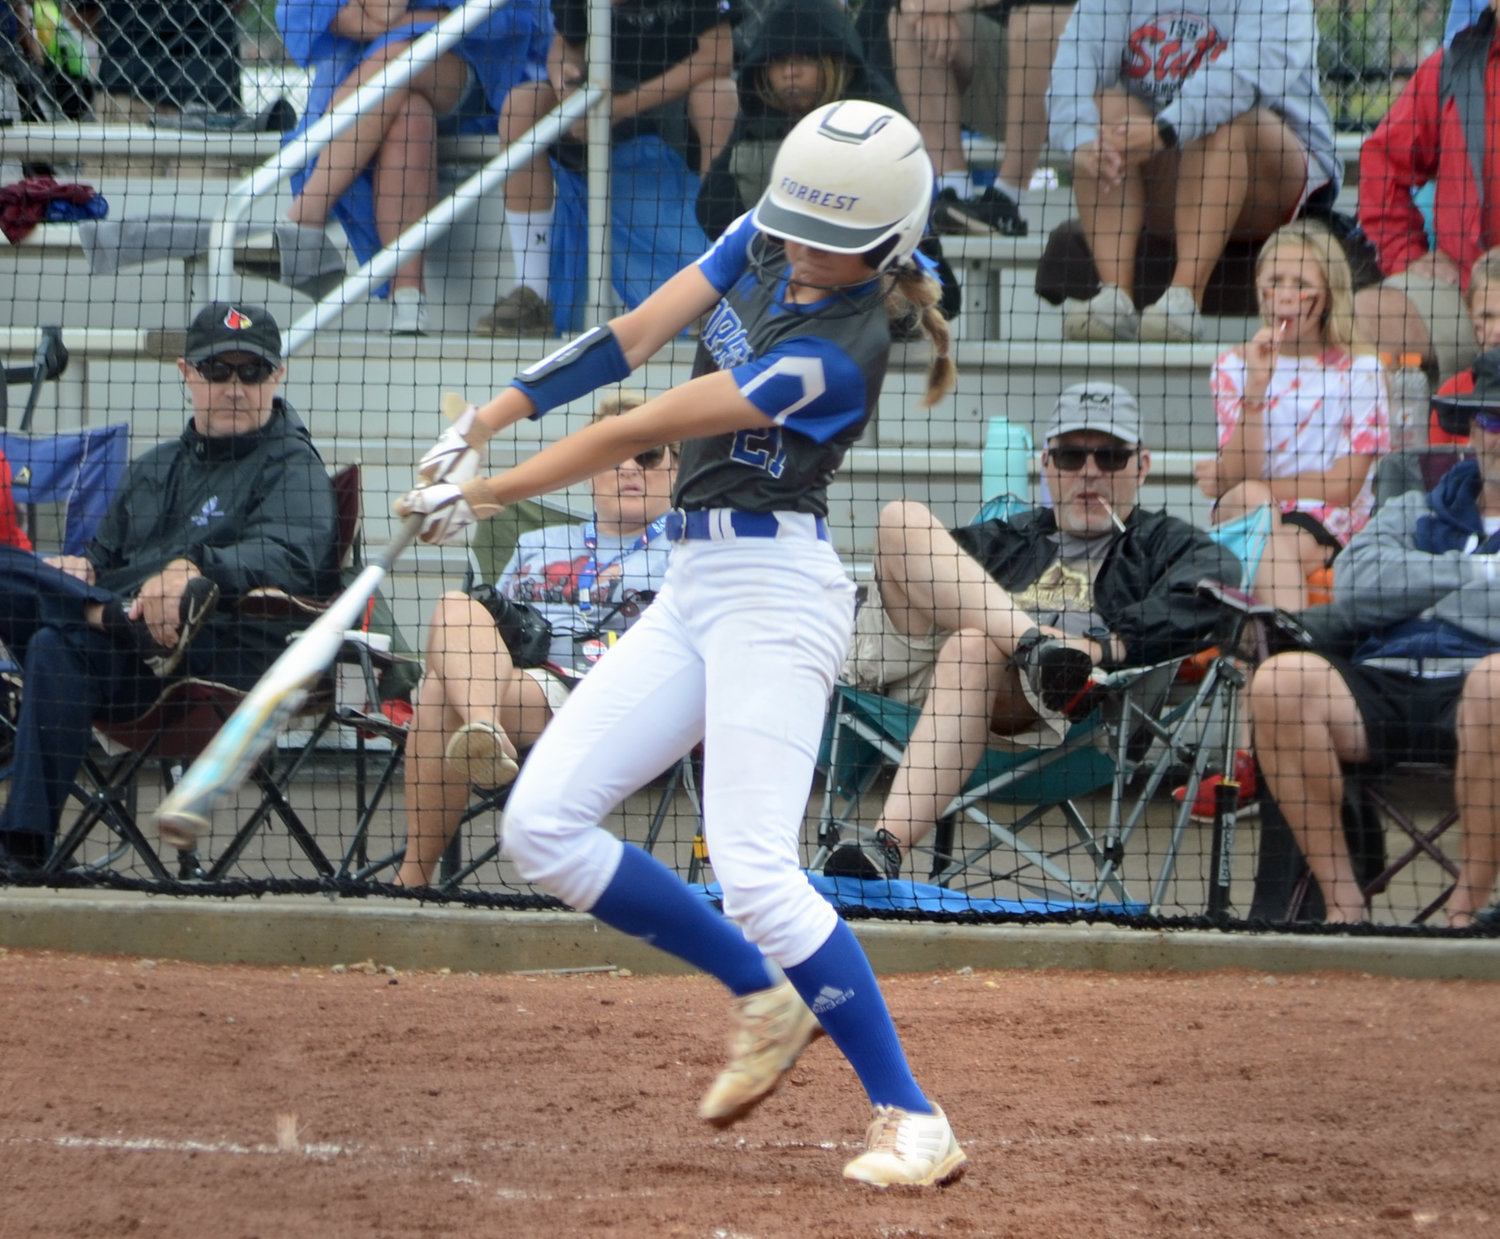 Maggie Daughrity had two hits, drove home one run, scored a run, and stole base.